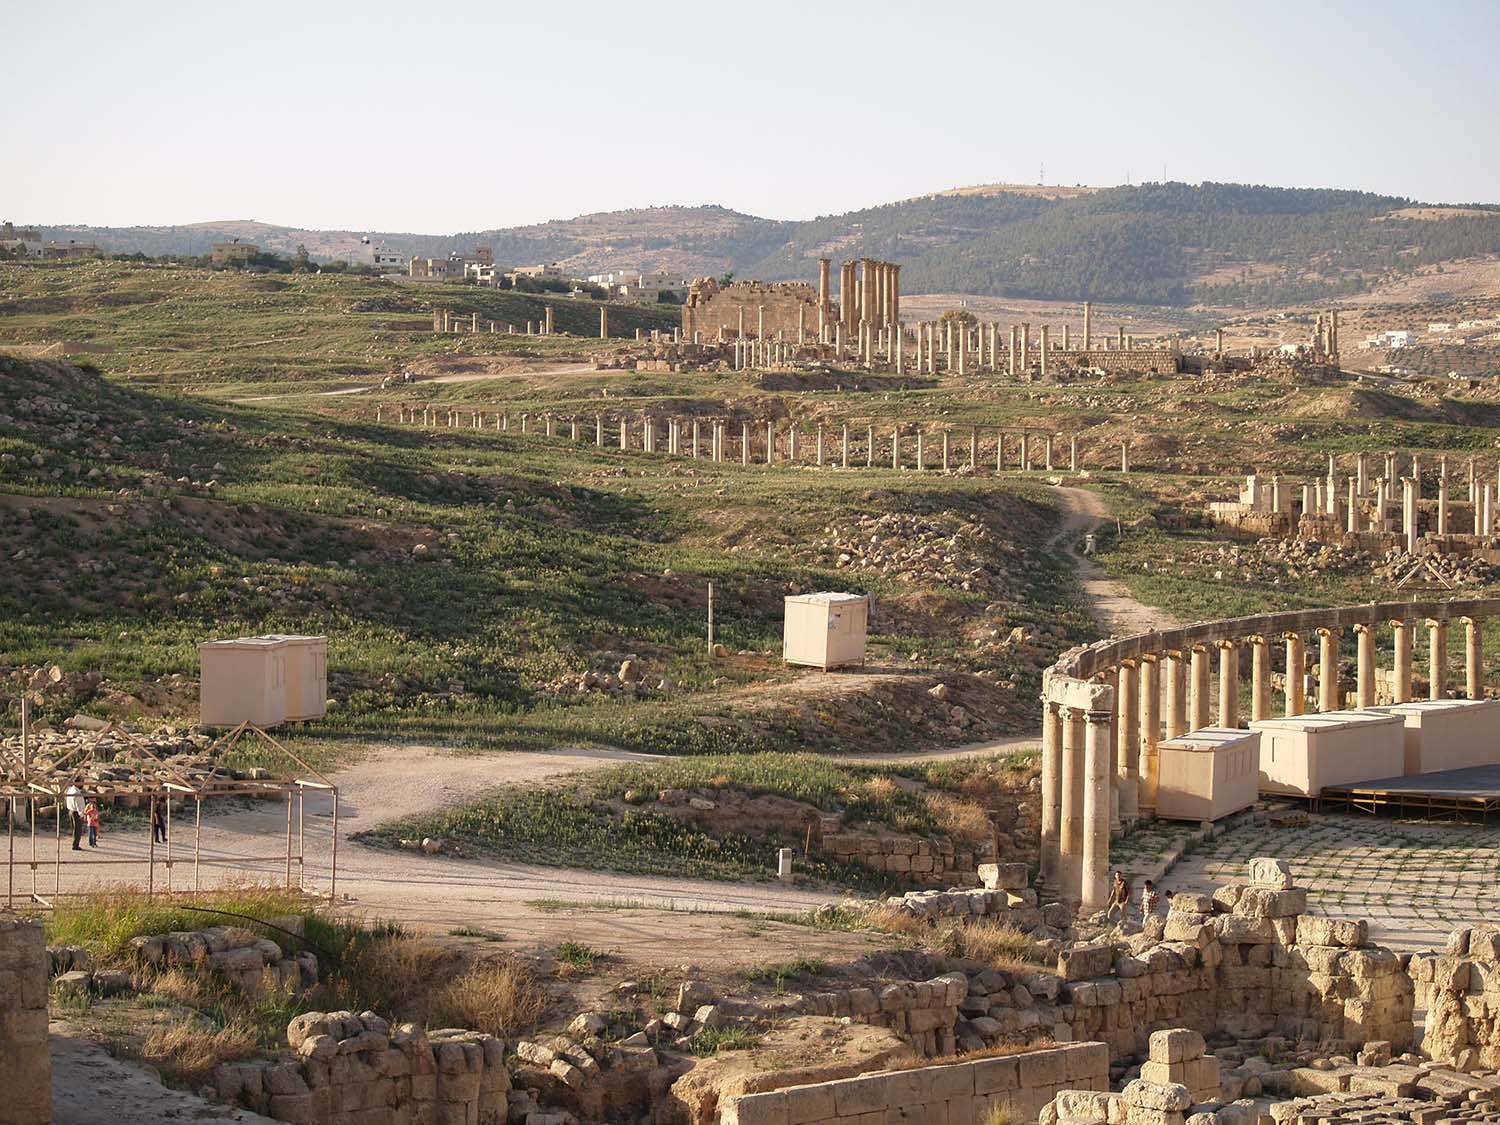 Northeast view; Oval Plaza on far right of foreground, Temple of Artemis in background